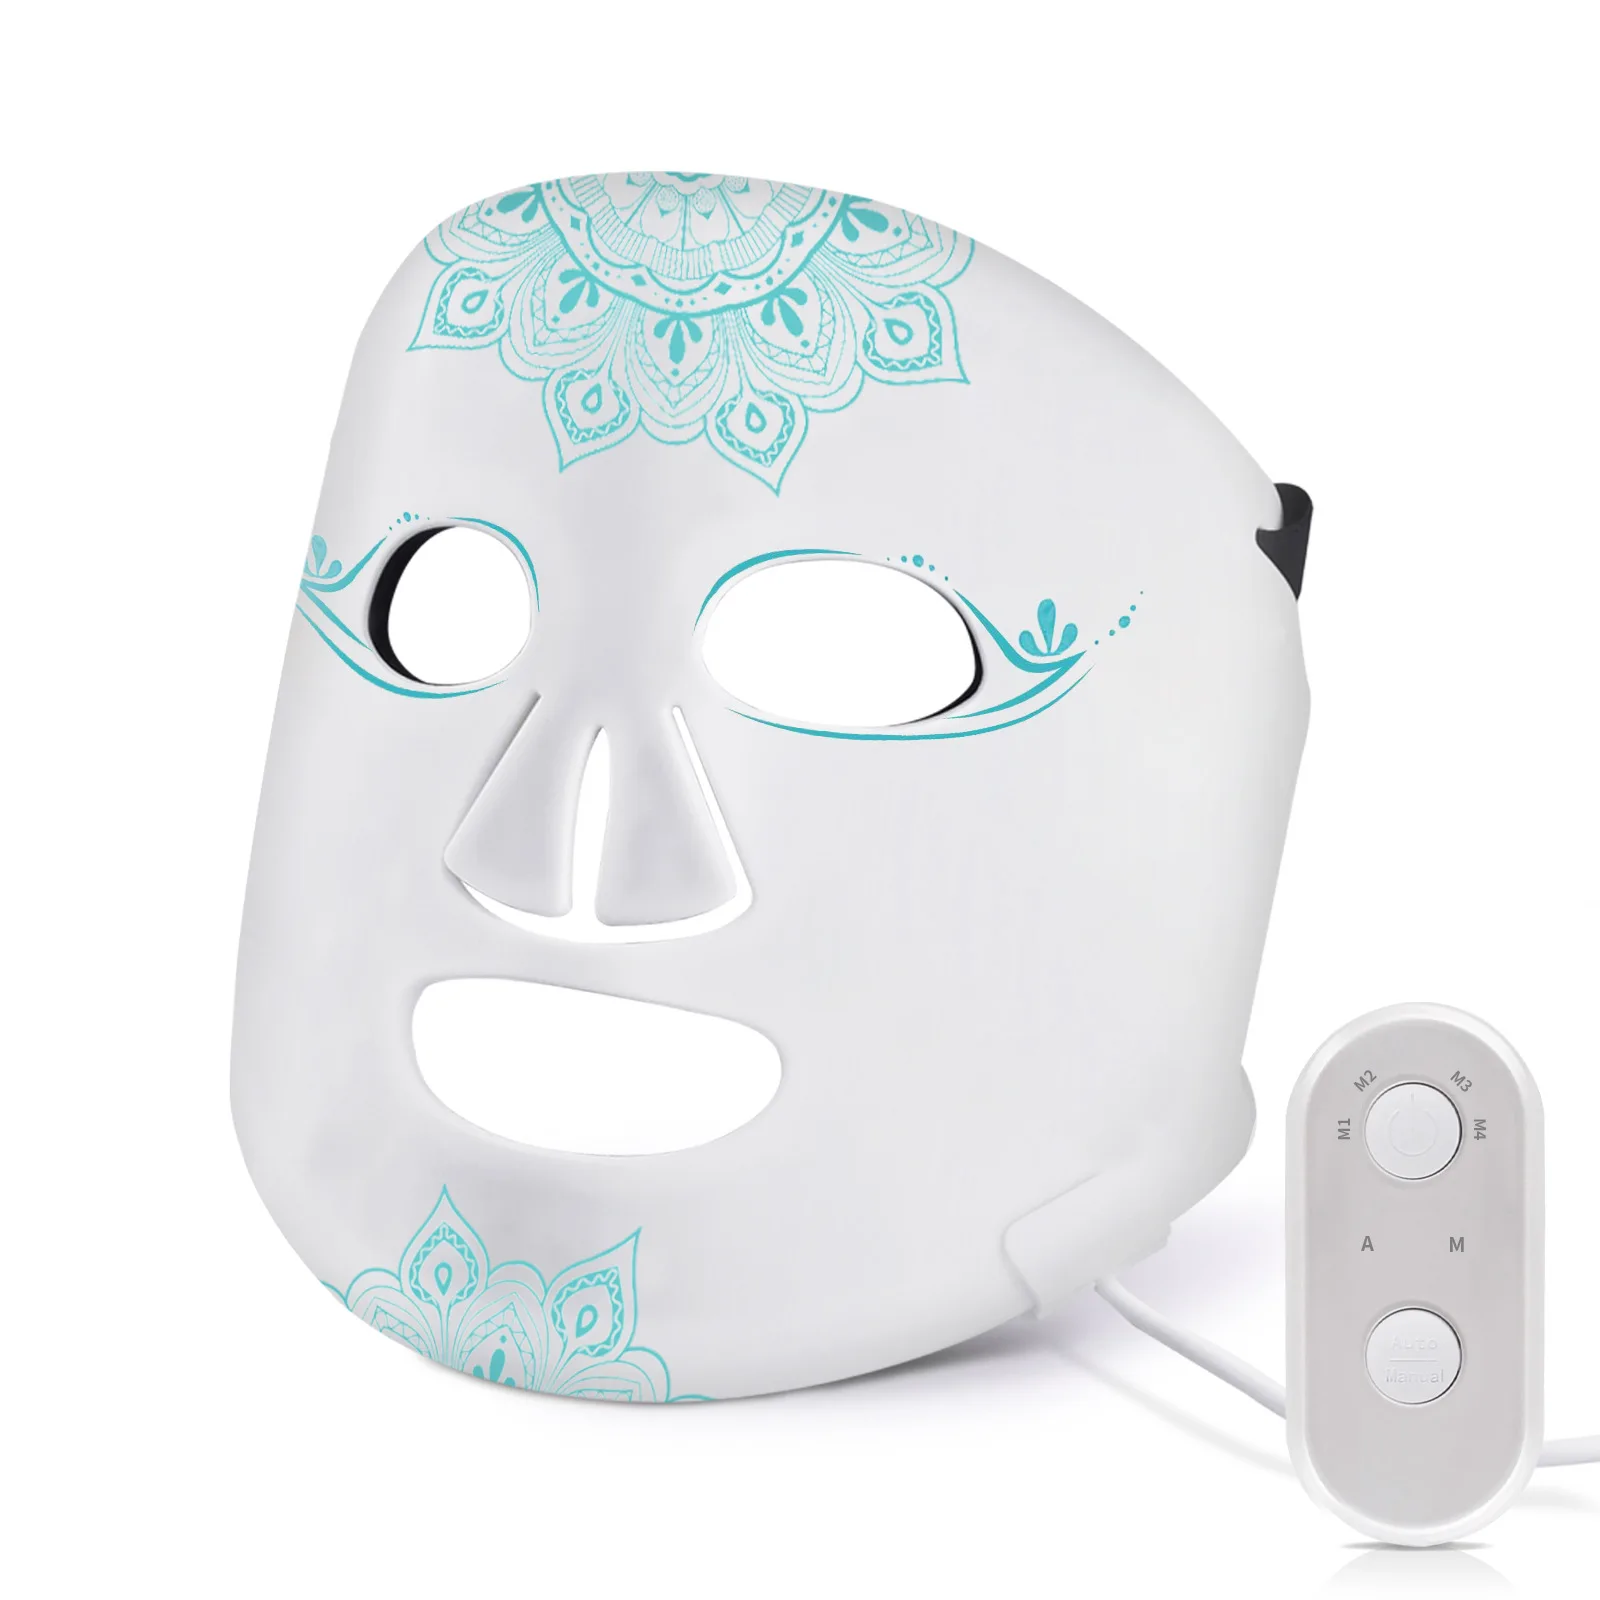 Flexible Silicone 4 Colors Led Face Mask Light Therapy Anti-Aging LED MASK for Wrinkles Rejuvenation Tightening Skin Care